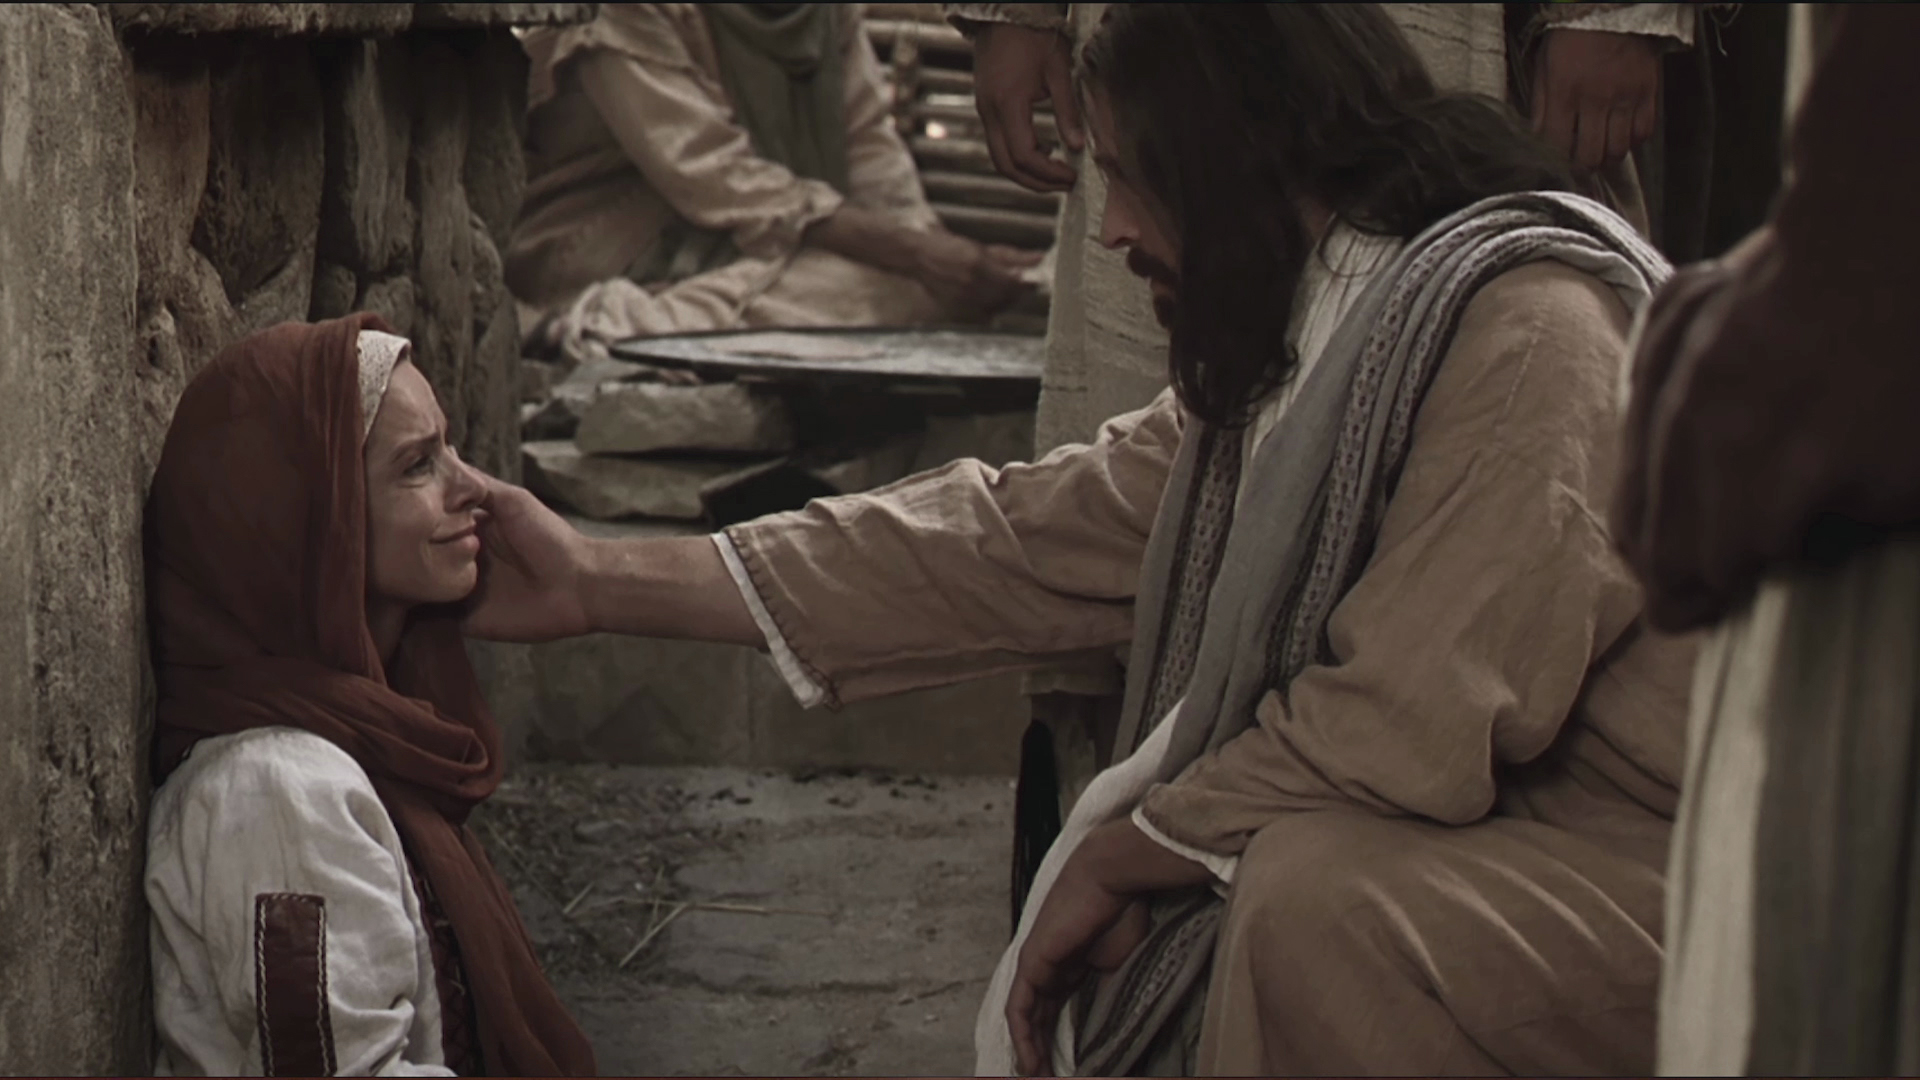 A photo of Jesus Christ kneeling before a woman sitting on the ground with his hand stretched out.